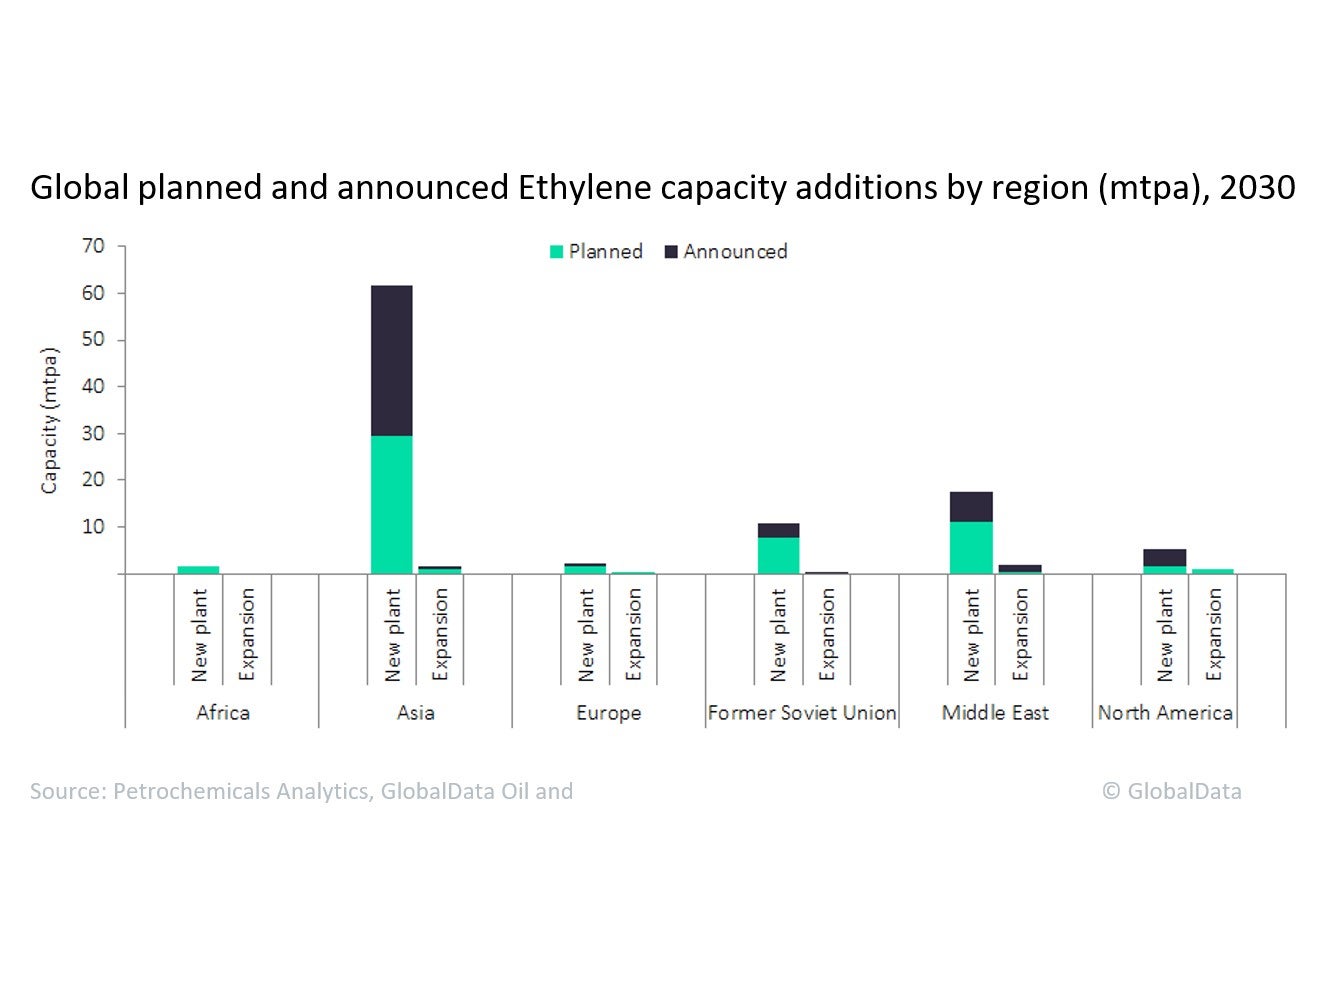 Asia to lead global ethylene capacity additions